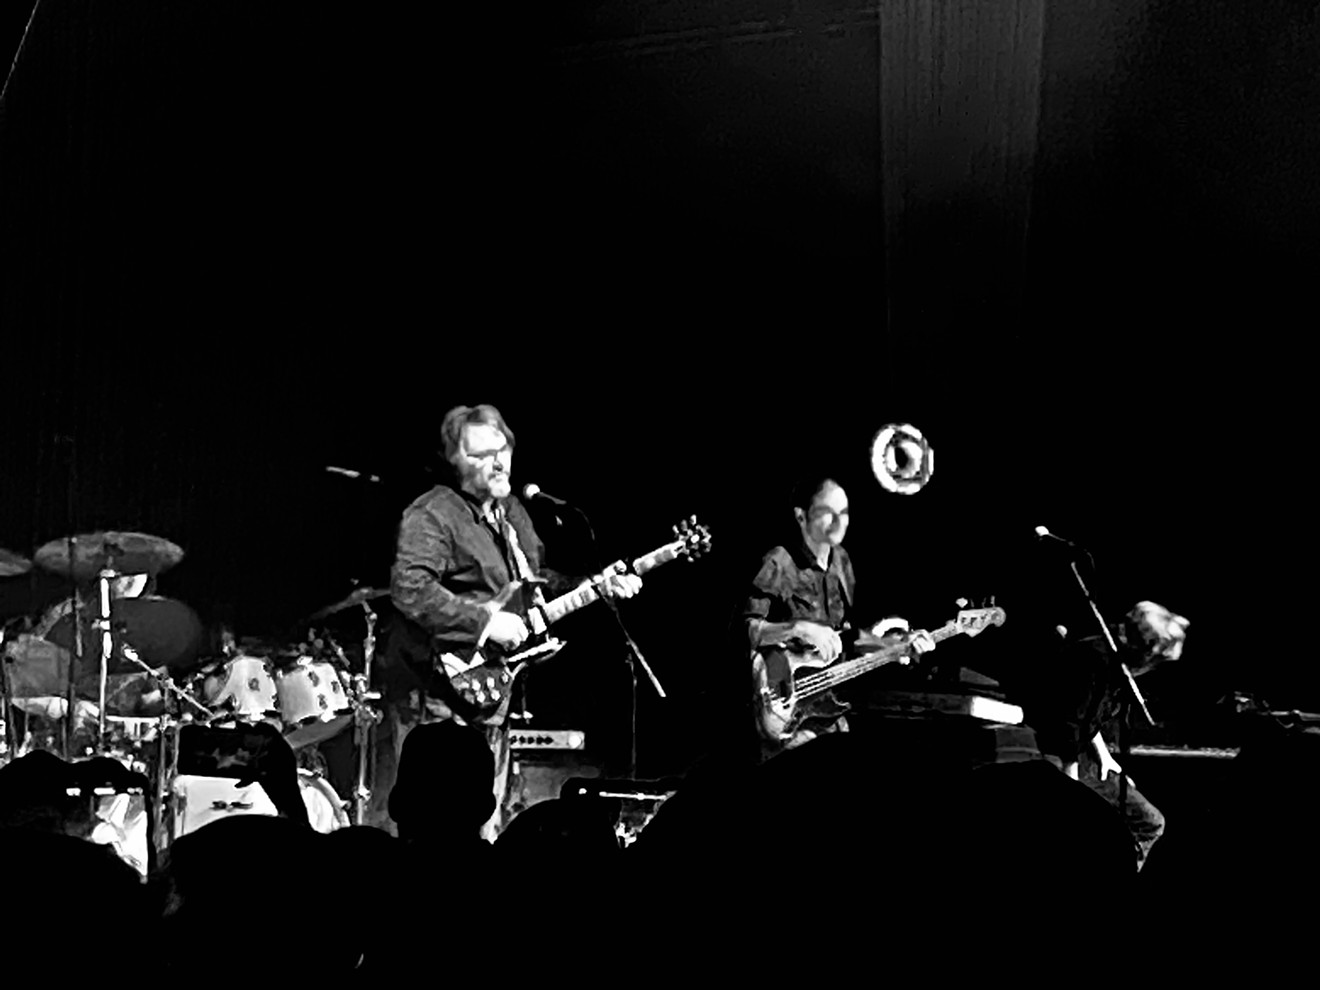 Dad rock band Wilco came to Dallas with a dad joke or two.